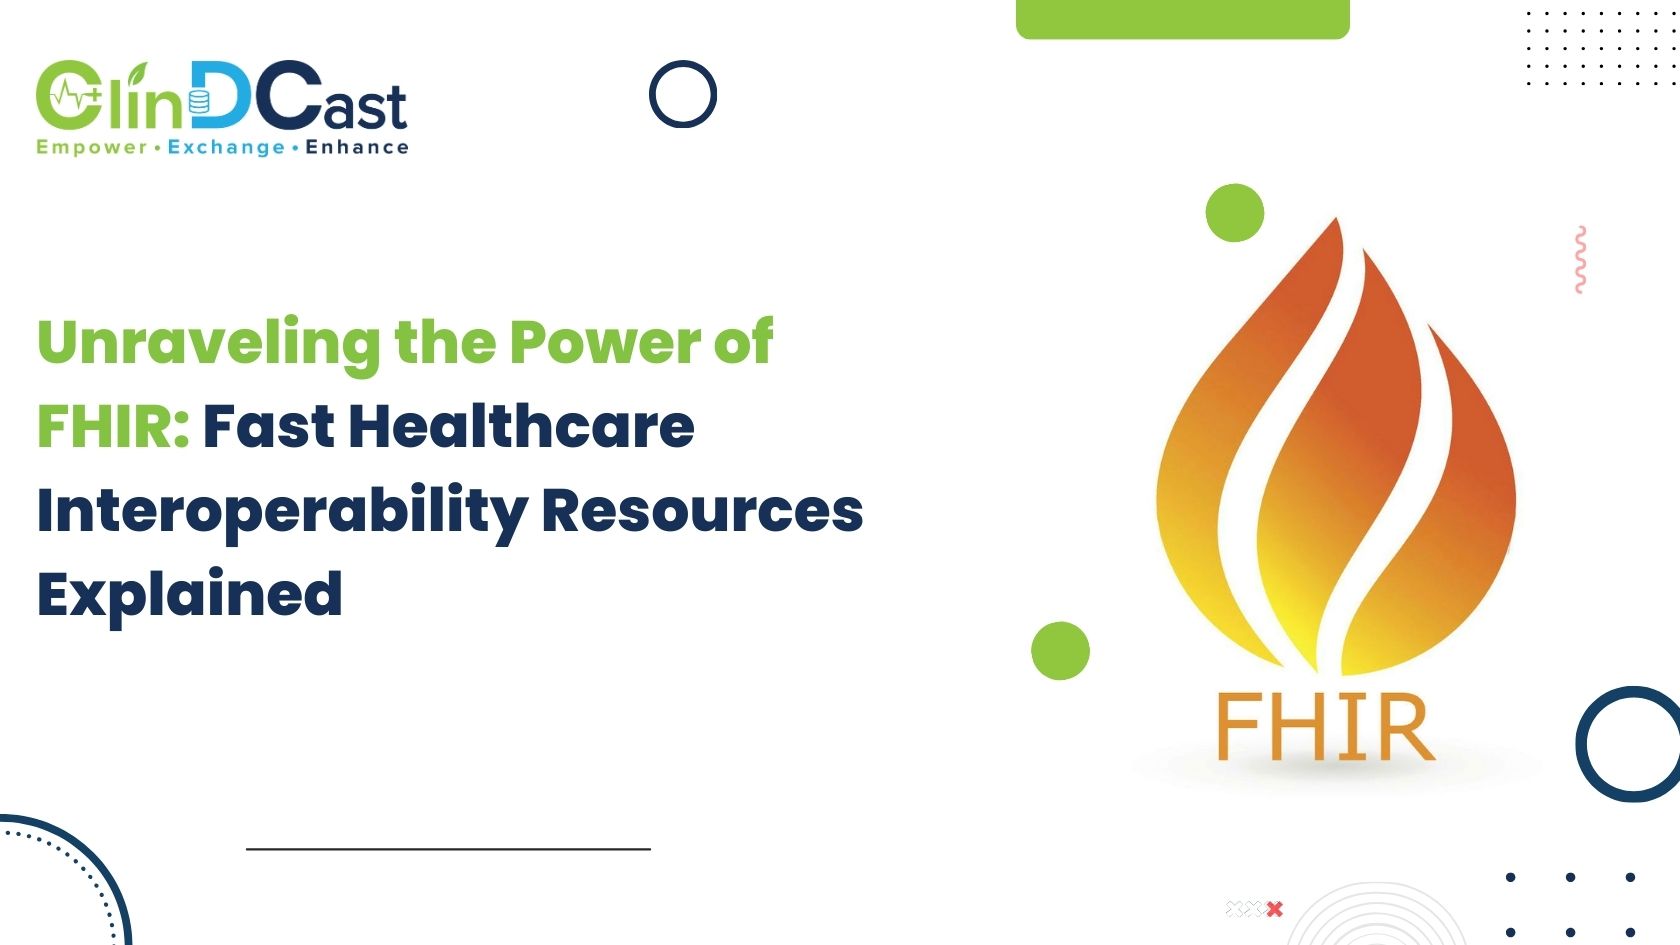 Fast Healthcare Interoperability Resources Explained